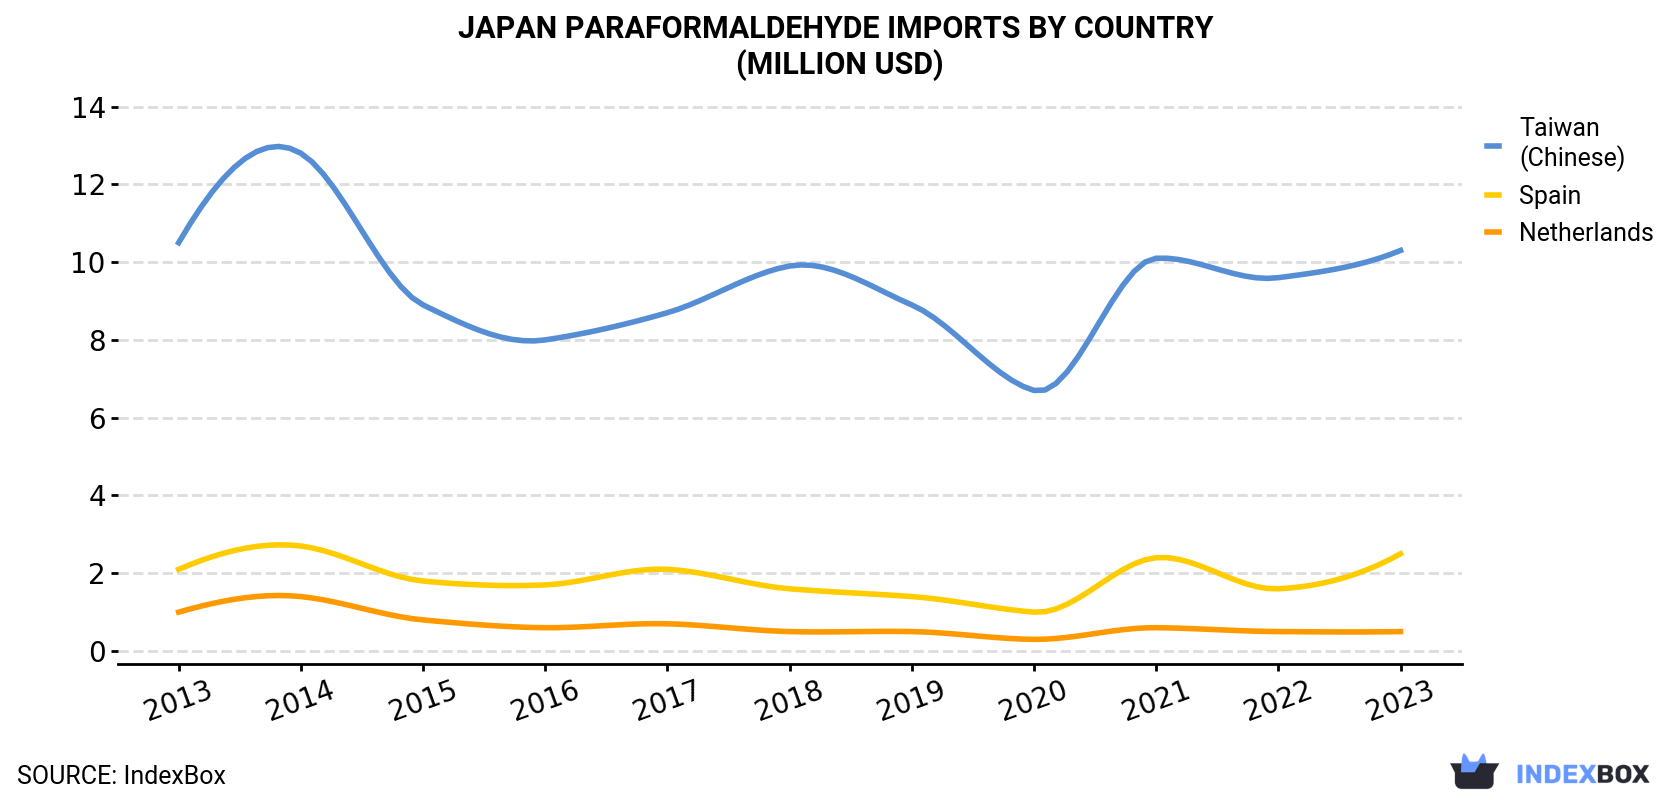 Japan Paraformaldehyde Imports By Country (Million USD)